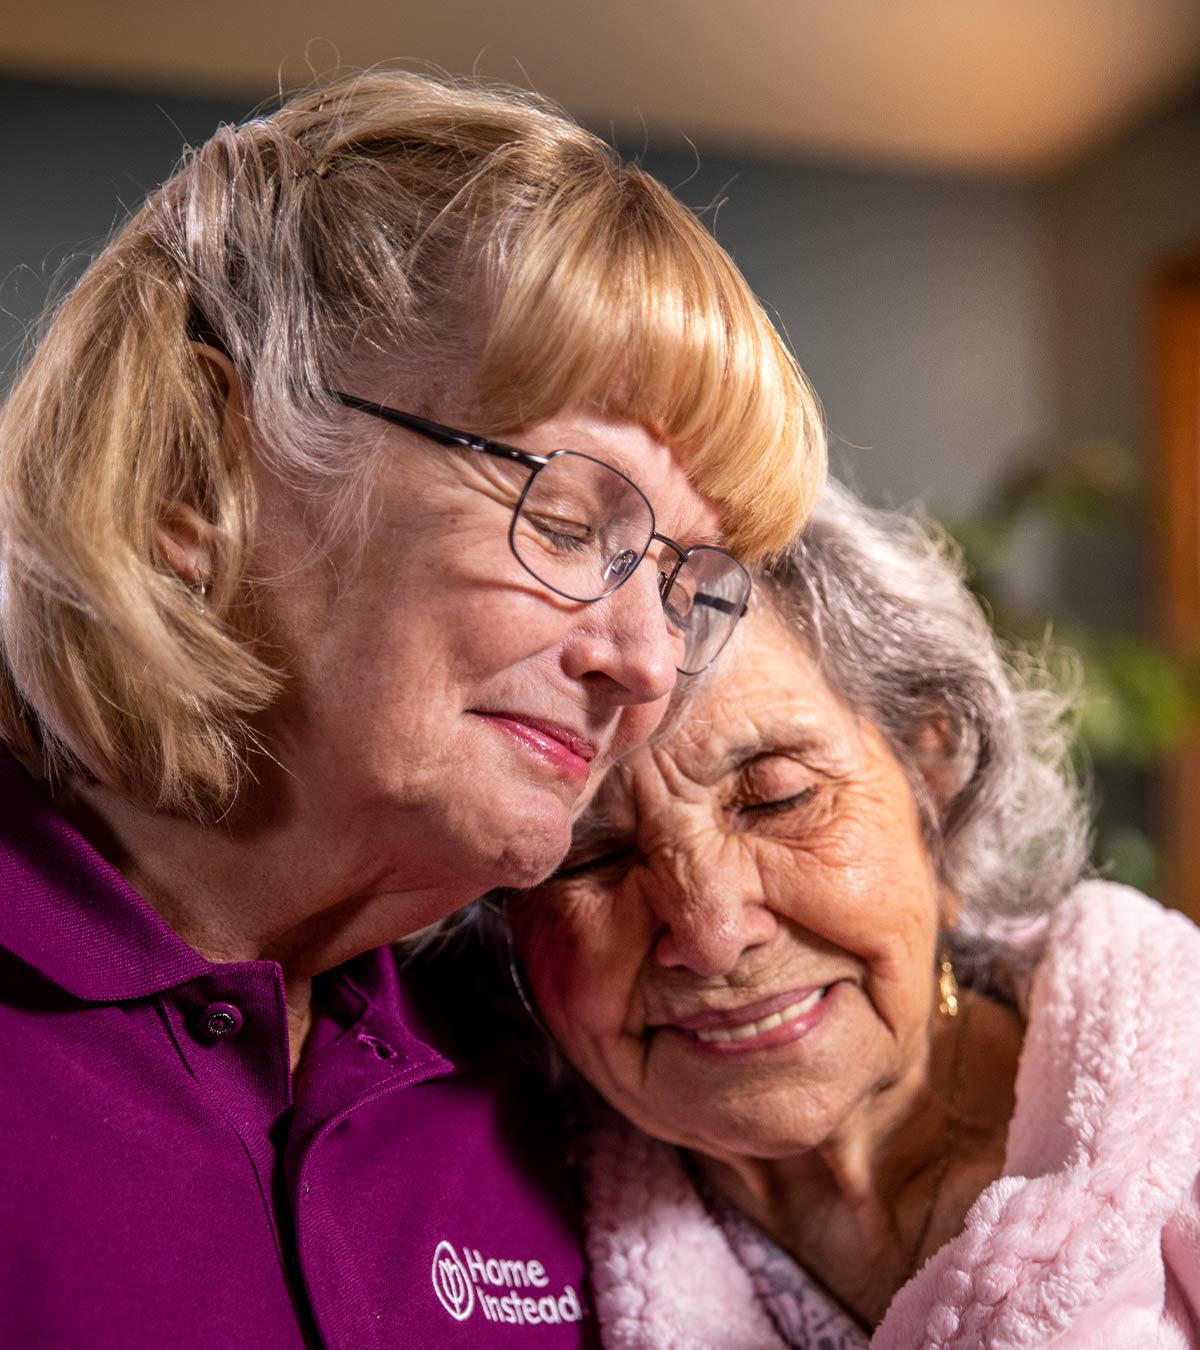 CAREGiver providing in-home senior care services. Home Instead of San Juan Capistrano, CA provides Elder Care to aging adults. 